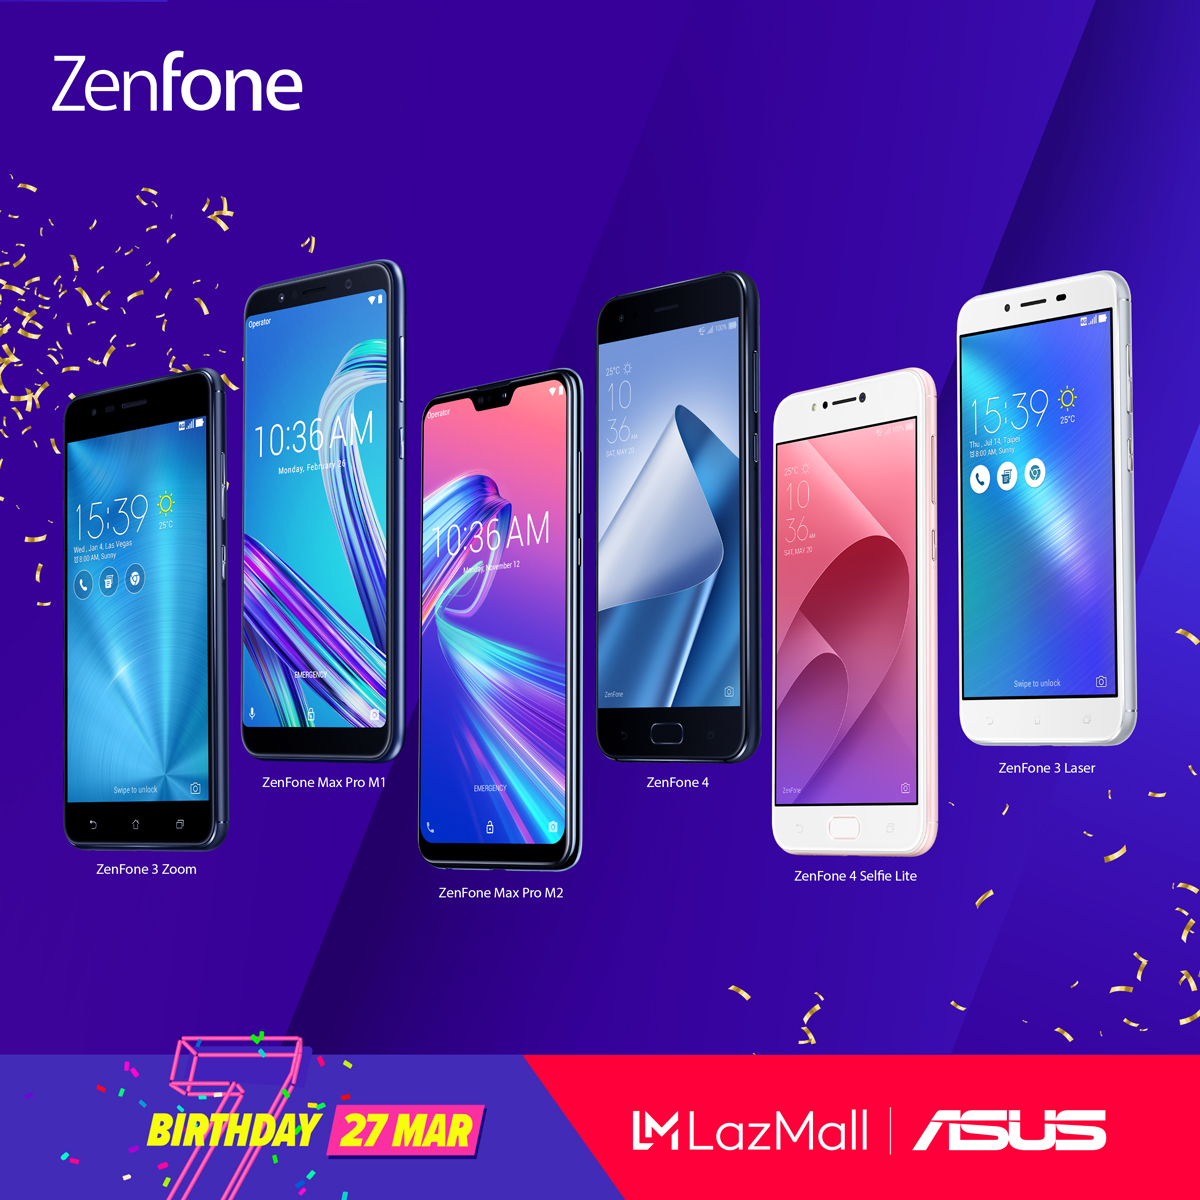 ASUS Celebrates the Lazada 3.3 Birthday Sale with Limited Price Drops on Zenfone and ZenPower Favorites